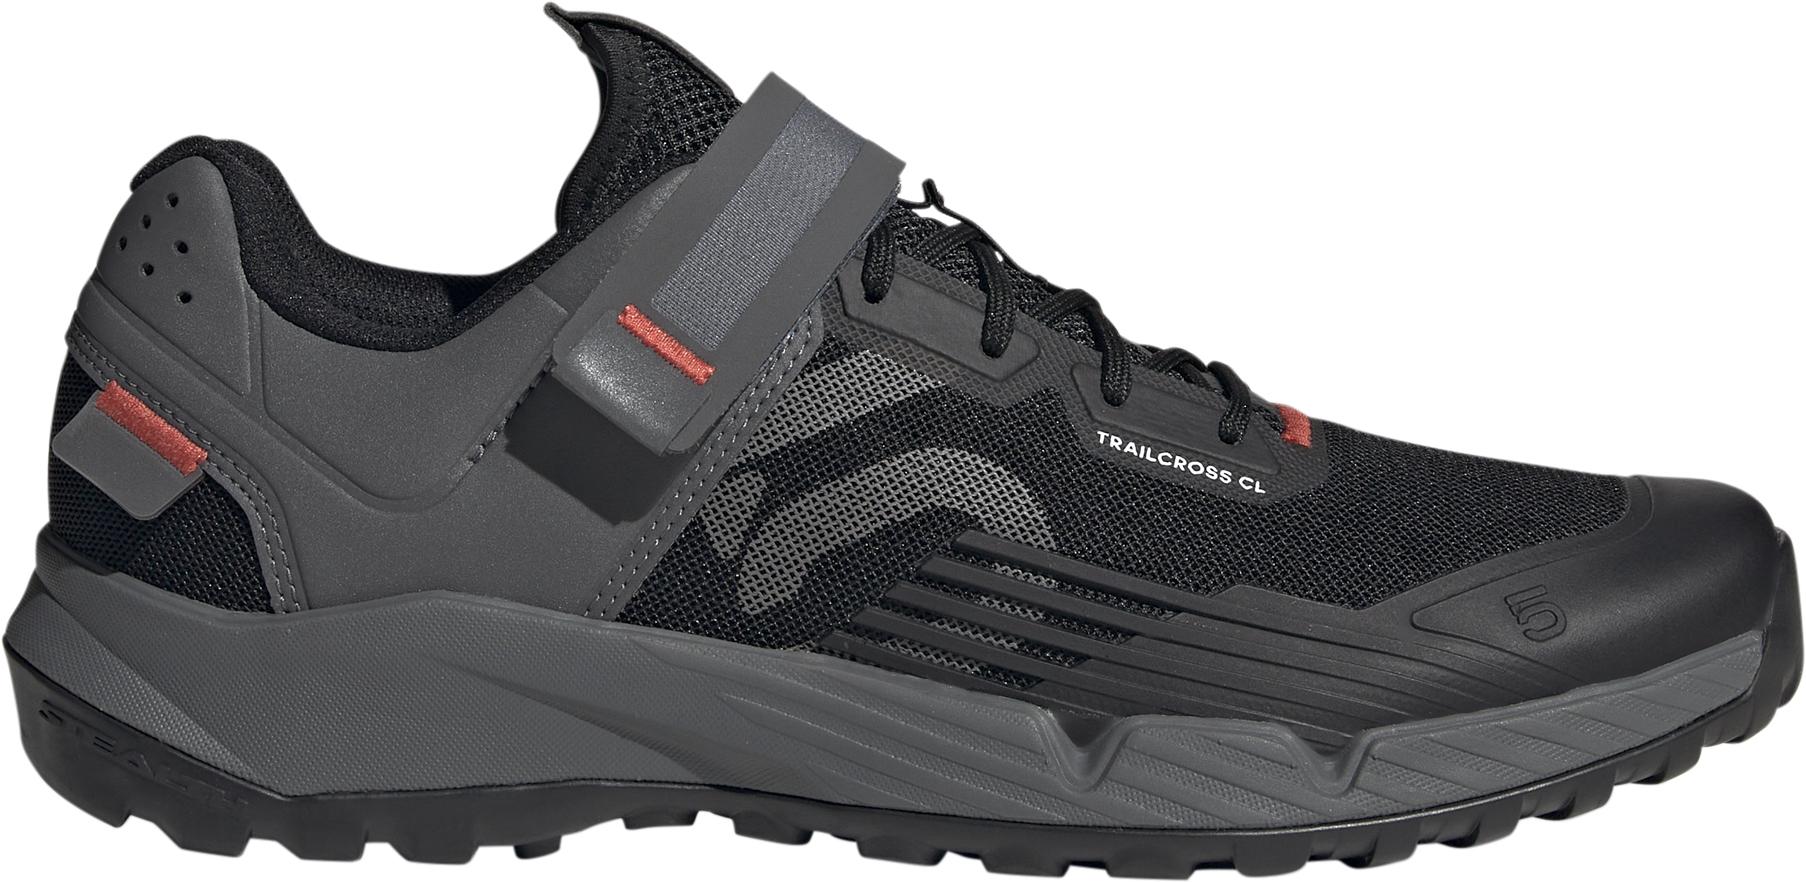 Five Ten Trailcross Cli Clip-in Cycle Shoes  Core Black/grey Three/red